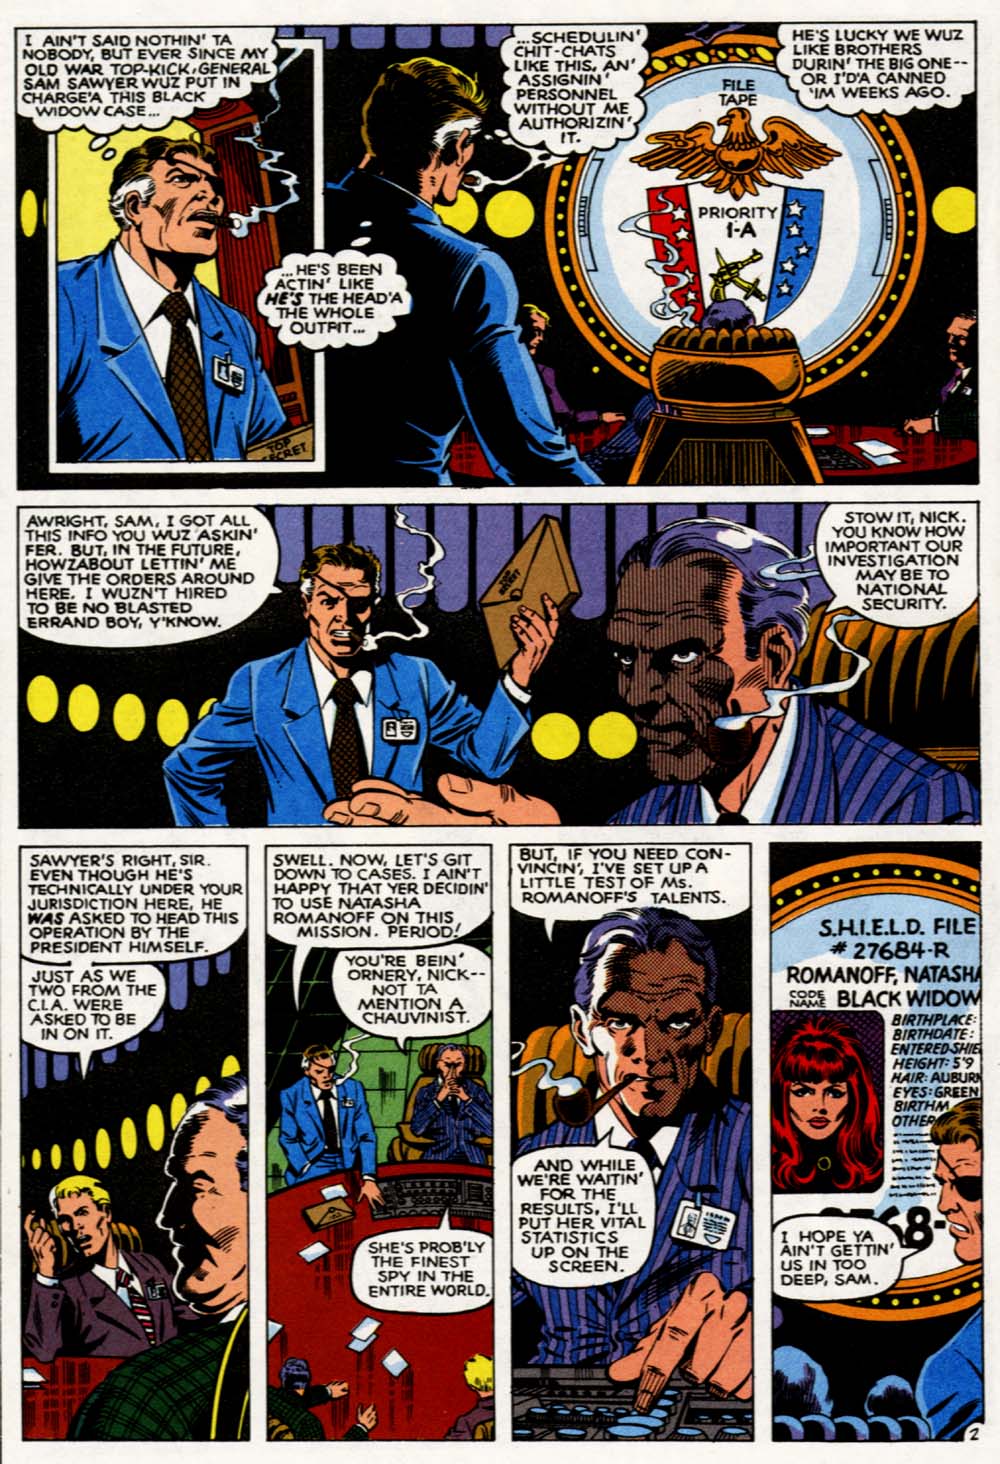 Black Widow: Web of Intrigue Full Page 6